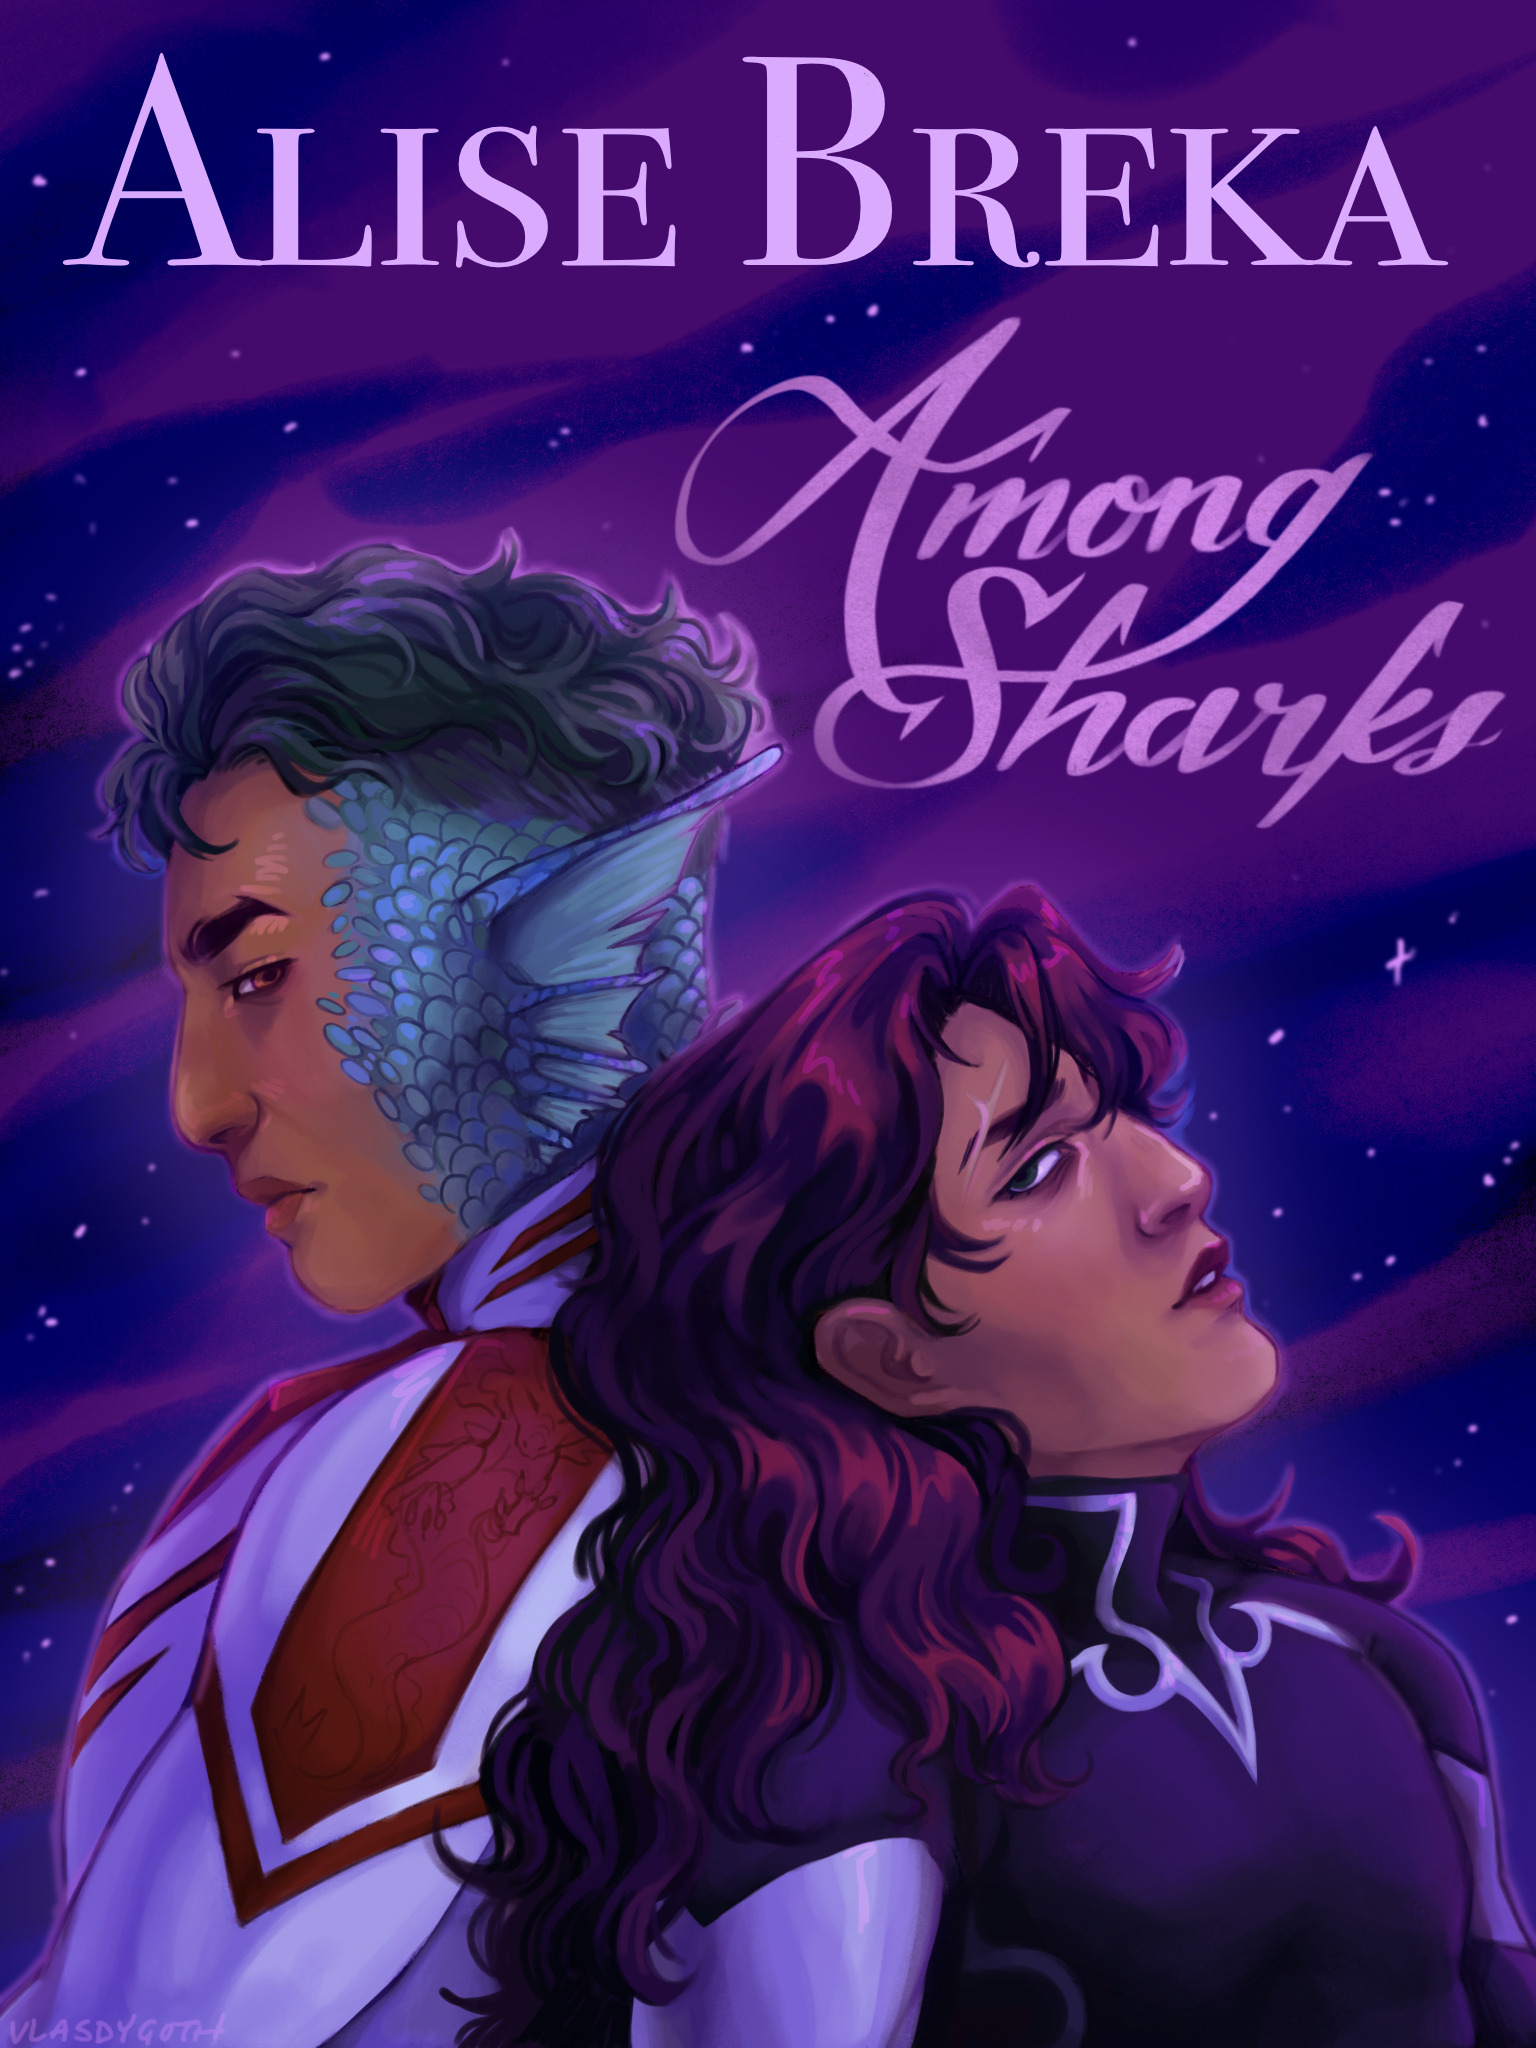 Cover for Among Sharks. Miseri and Cor'rina stand back-to-back in front of a Nebula.